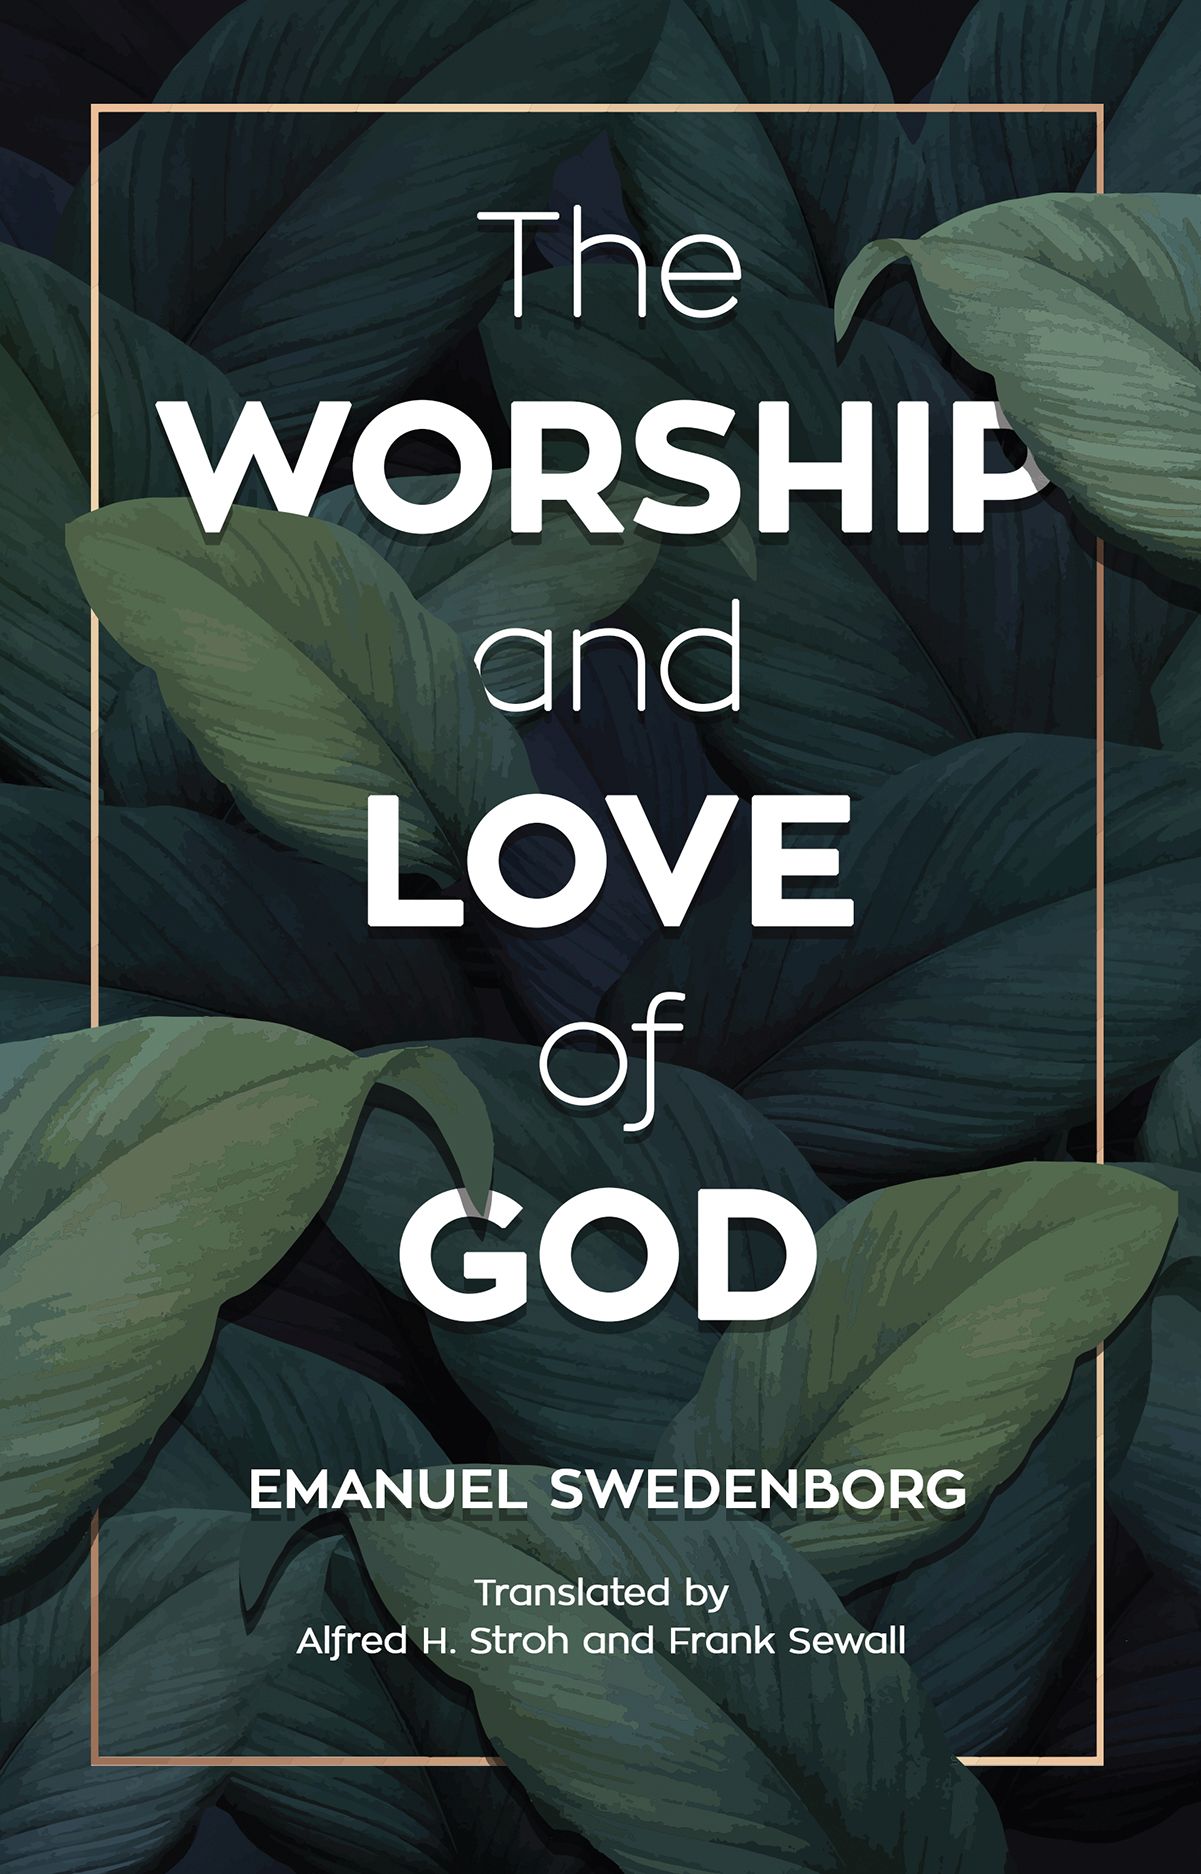 WORSHIP AND LOVE OF GOD